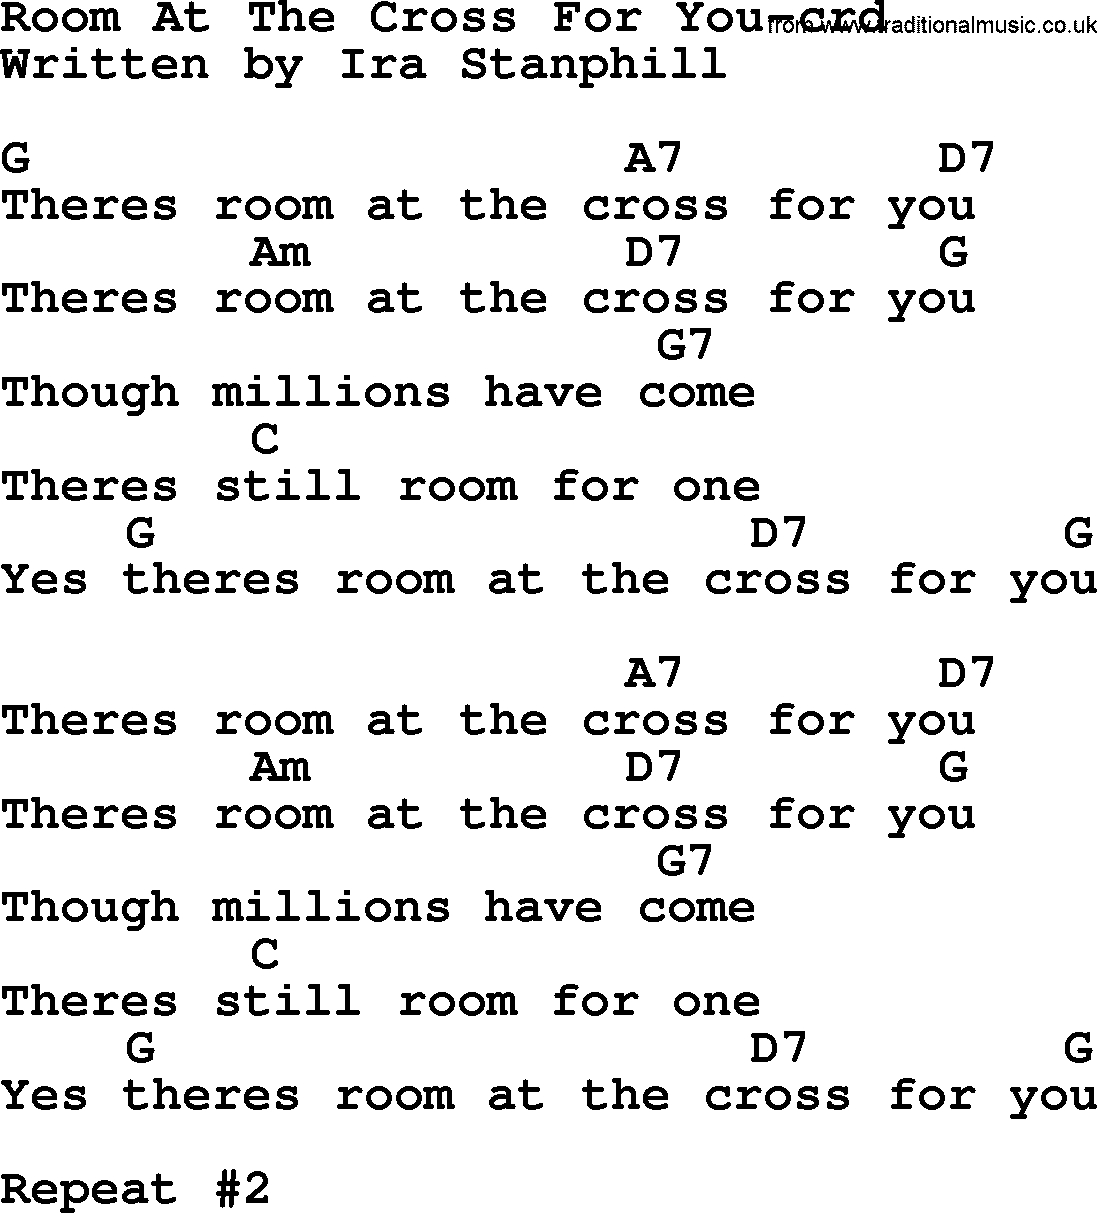 At The Cross Chords Top 500 Hymn Room At The Cross For You Lyrics Chords And Pdf